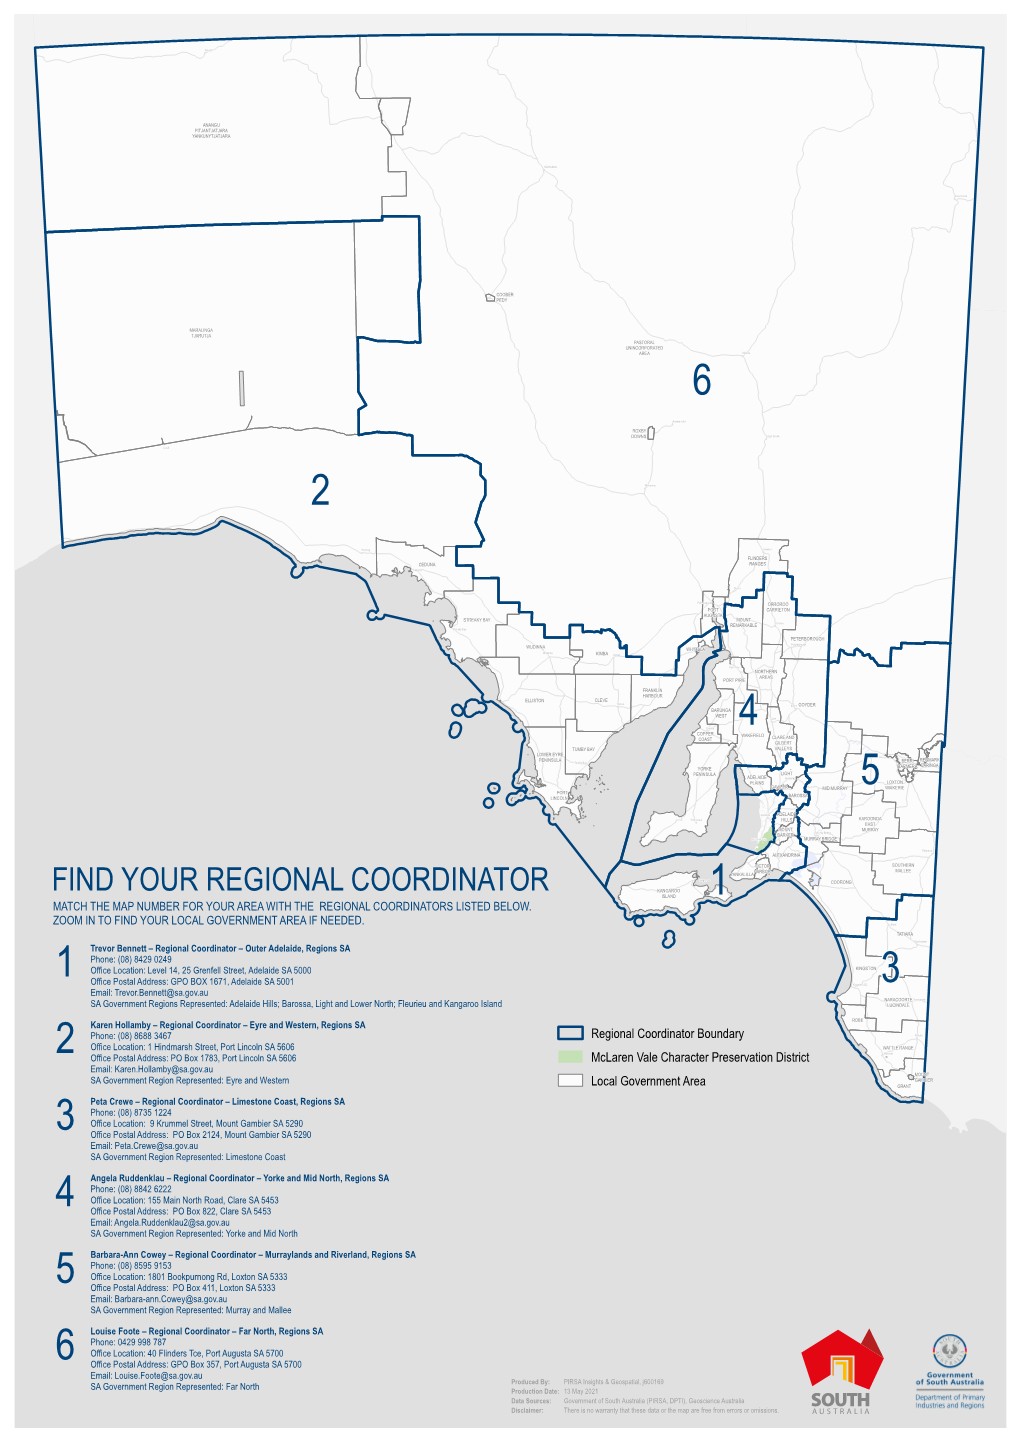 Find Your Regional Coordinator Island 1 Match the Map Number for Your Area with the Regional Coordinators Listed Below